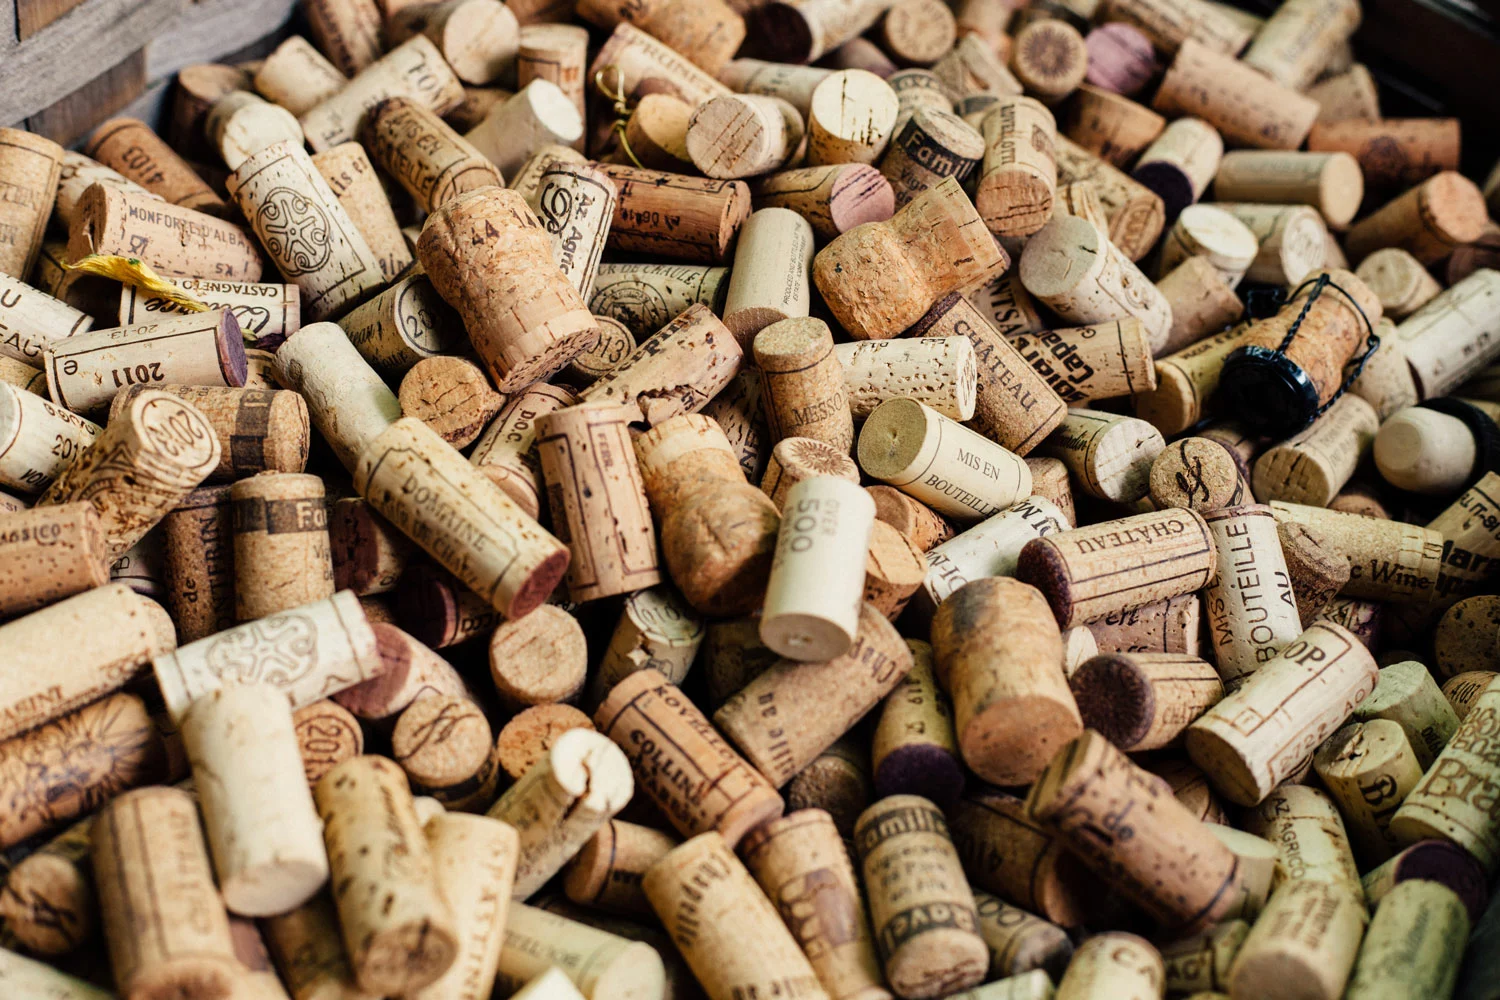 A pile of wine corks in a wooden crate.